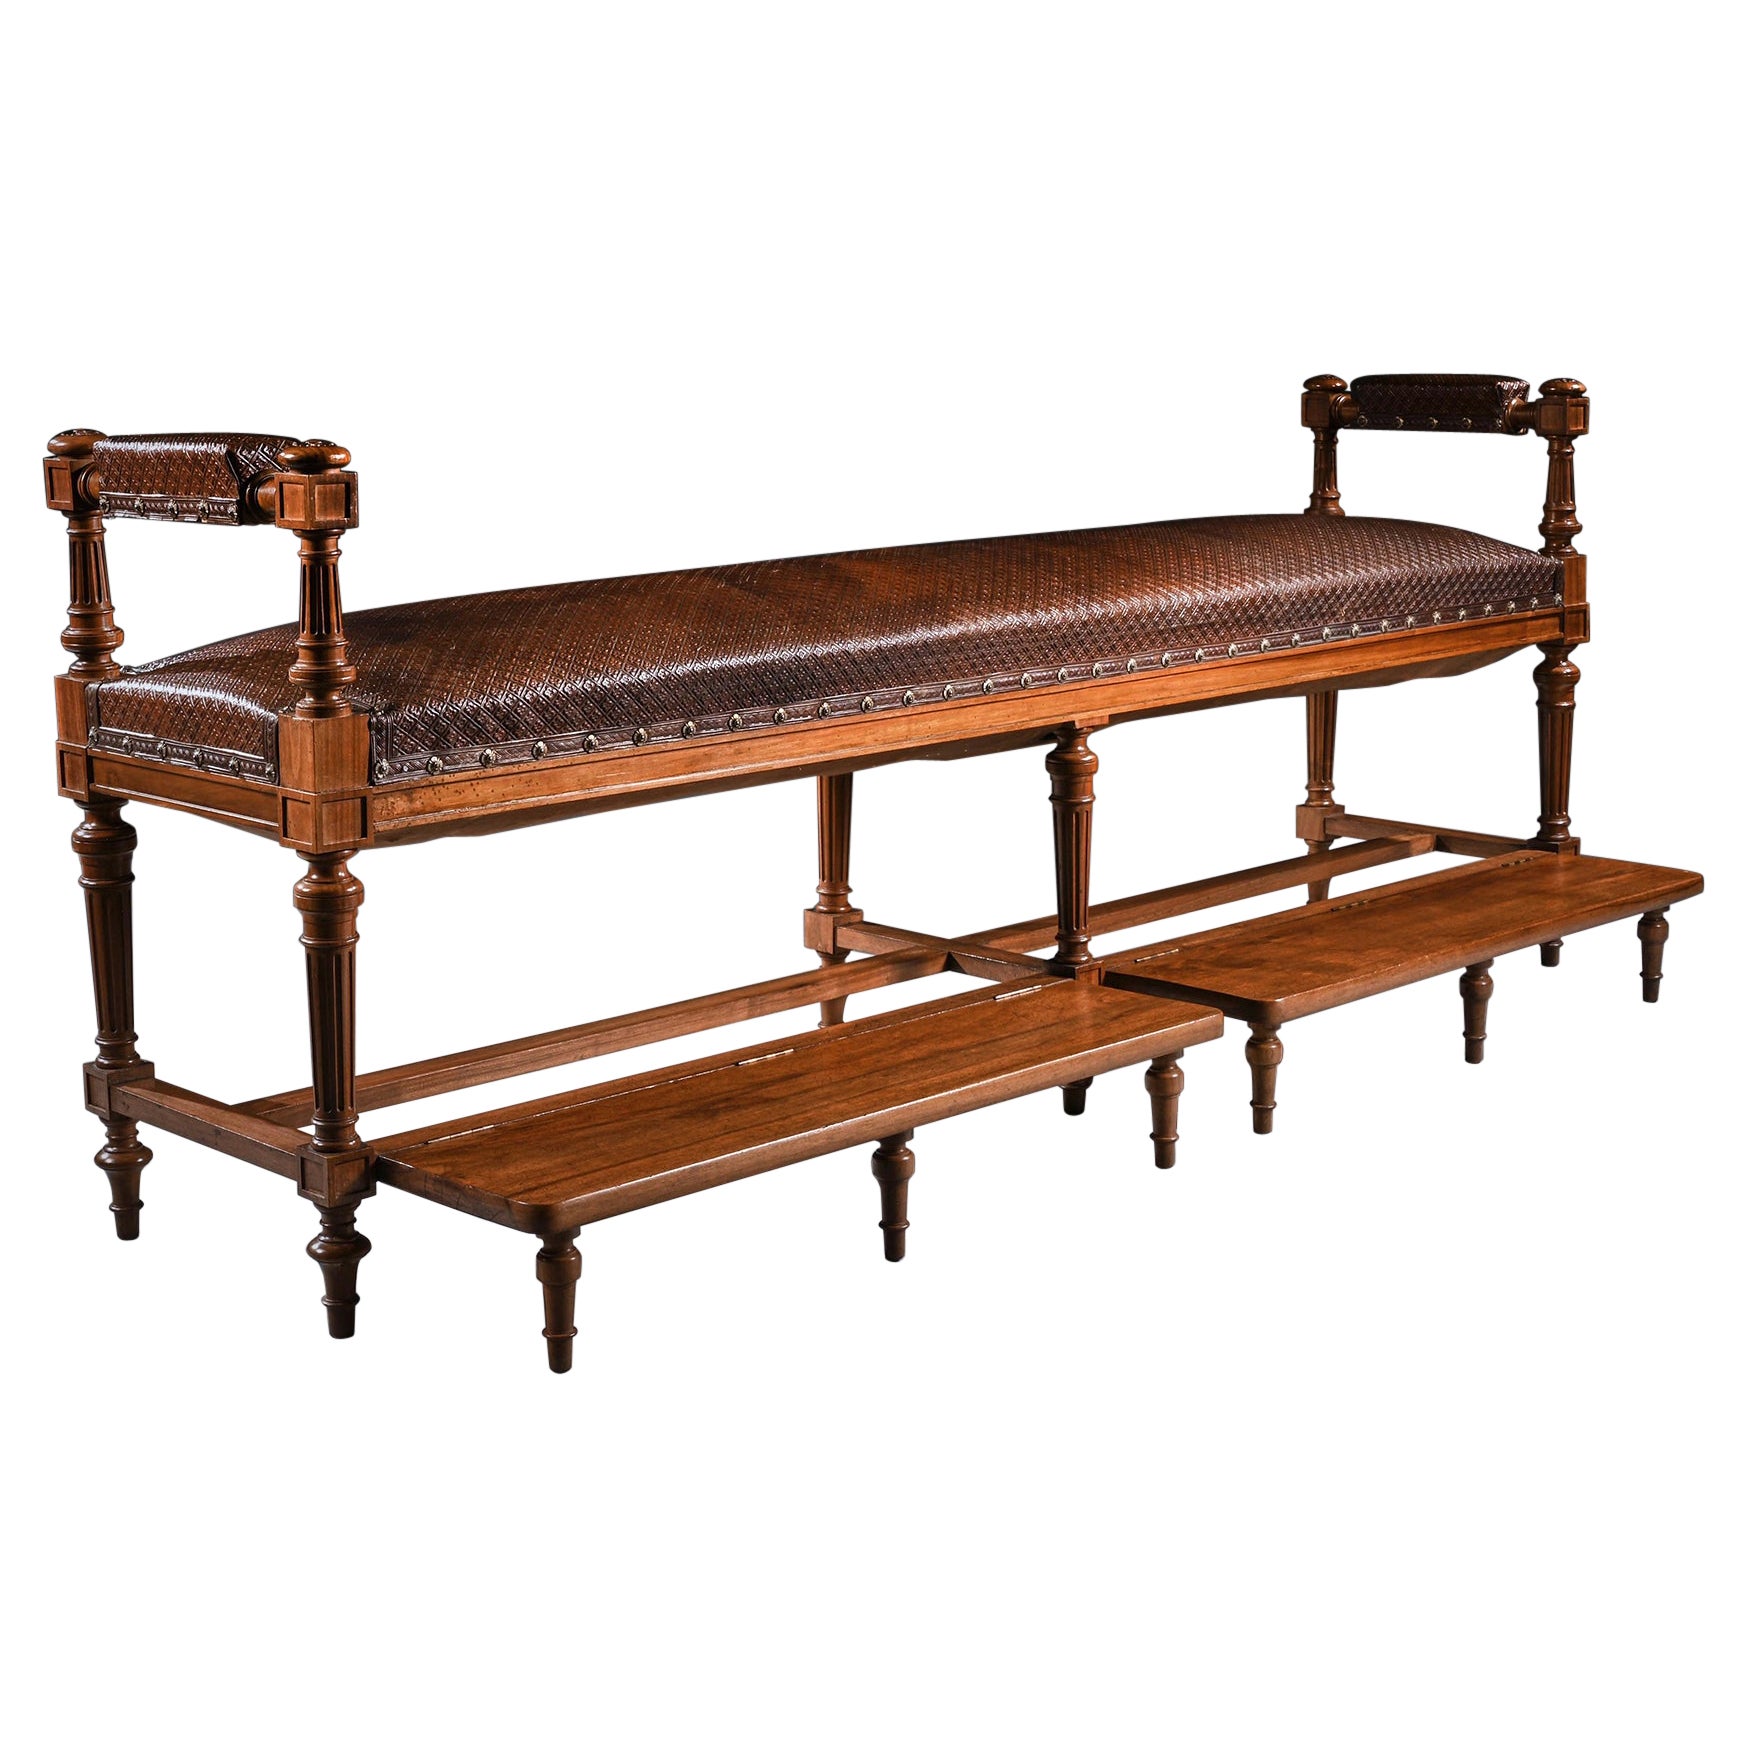 Large French 19th C Walnut & Embossed Leather Billiard Room Bench 'Banquette De